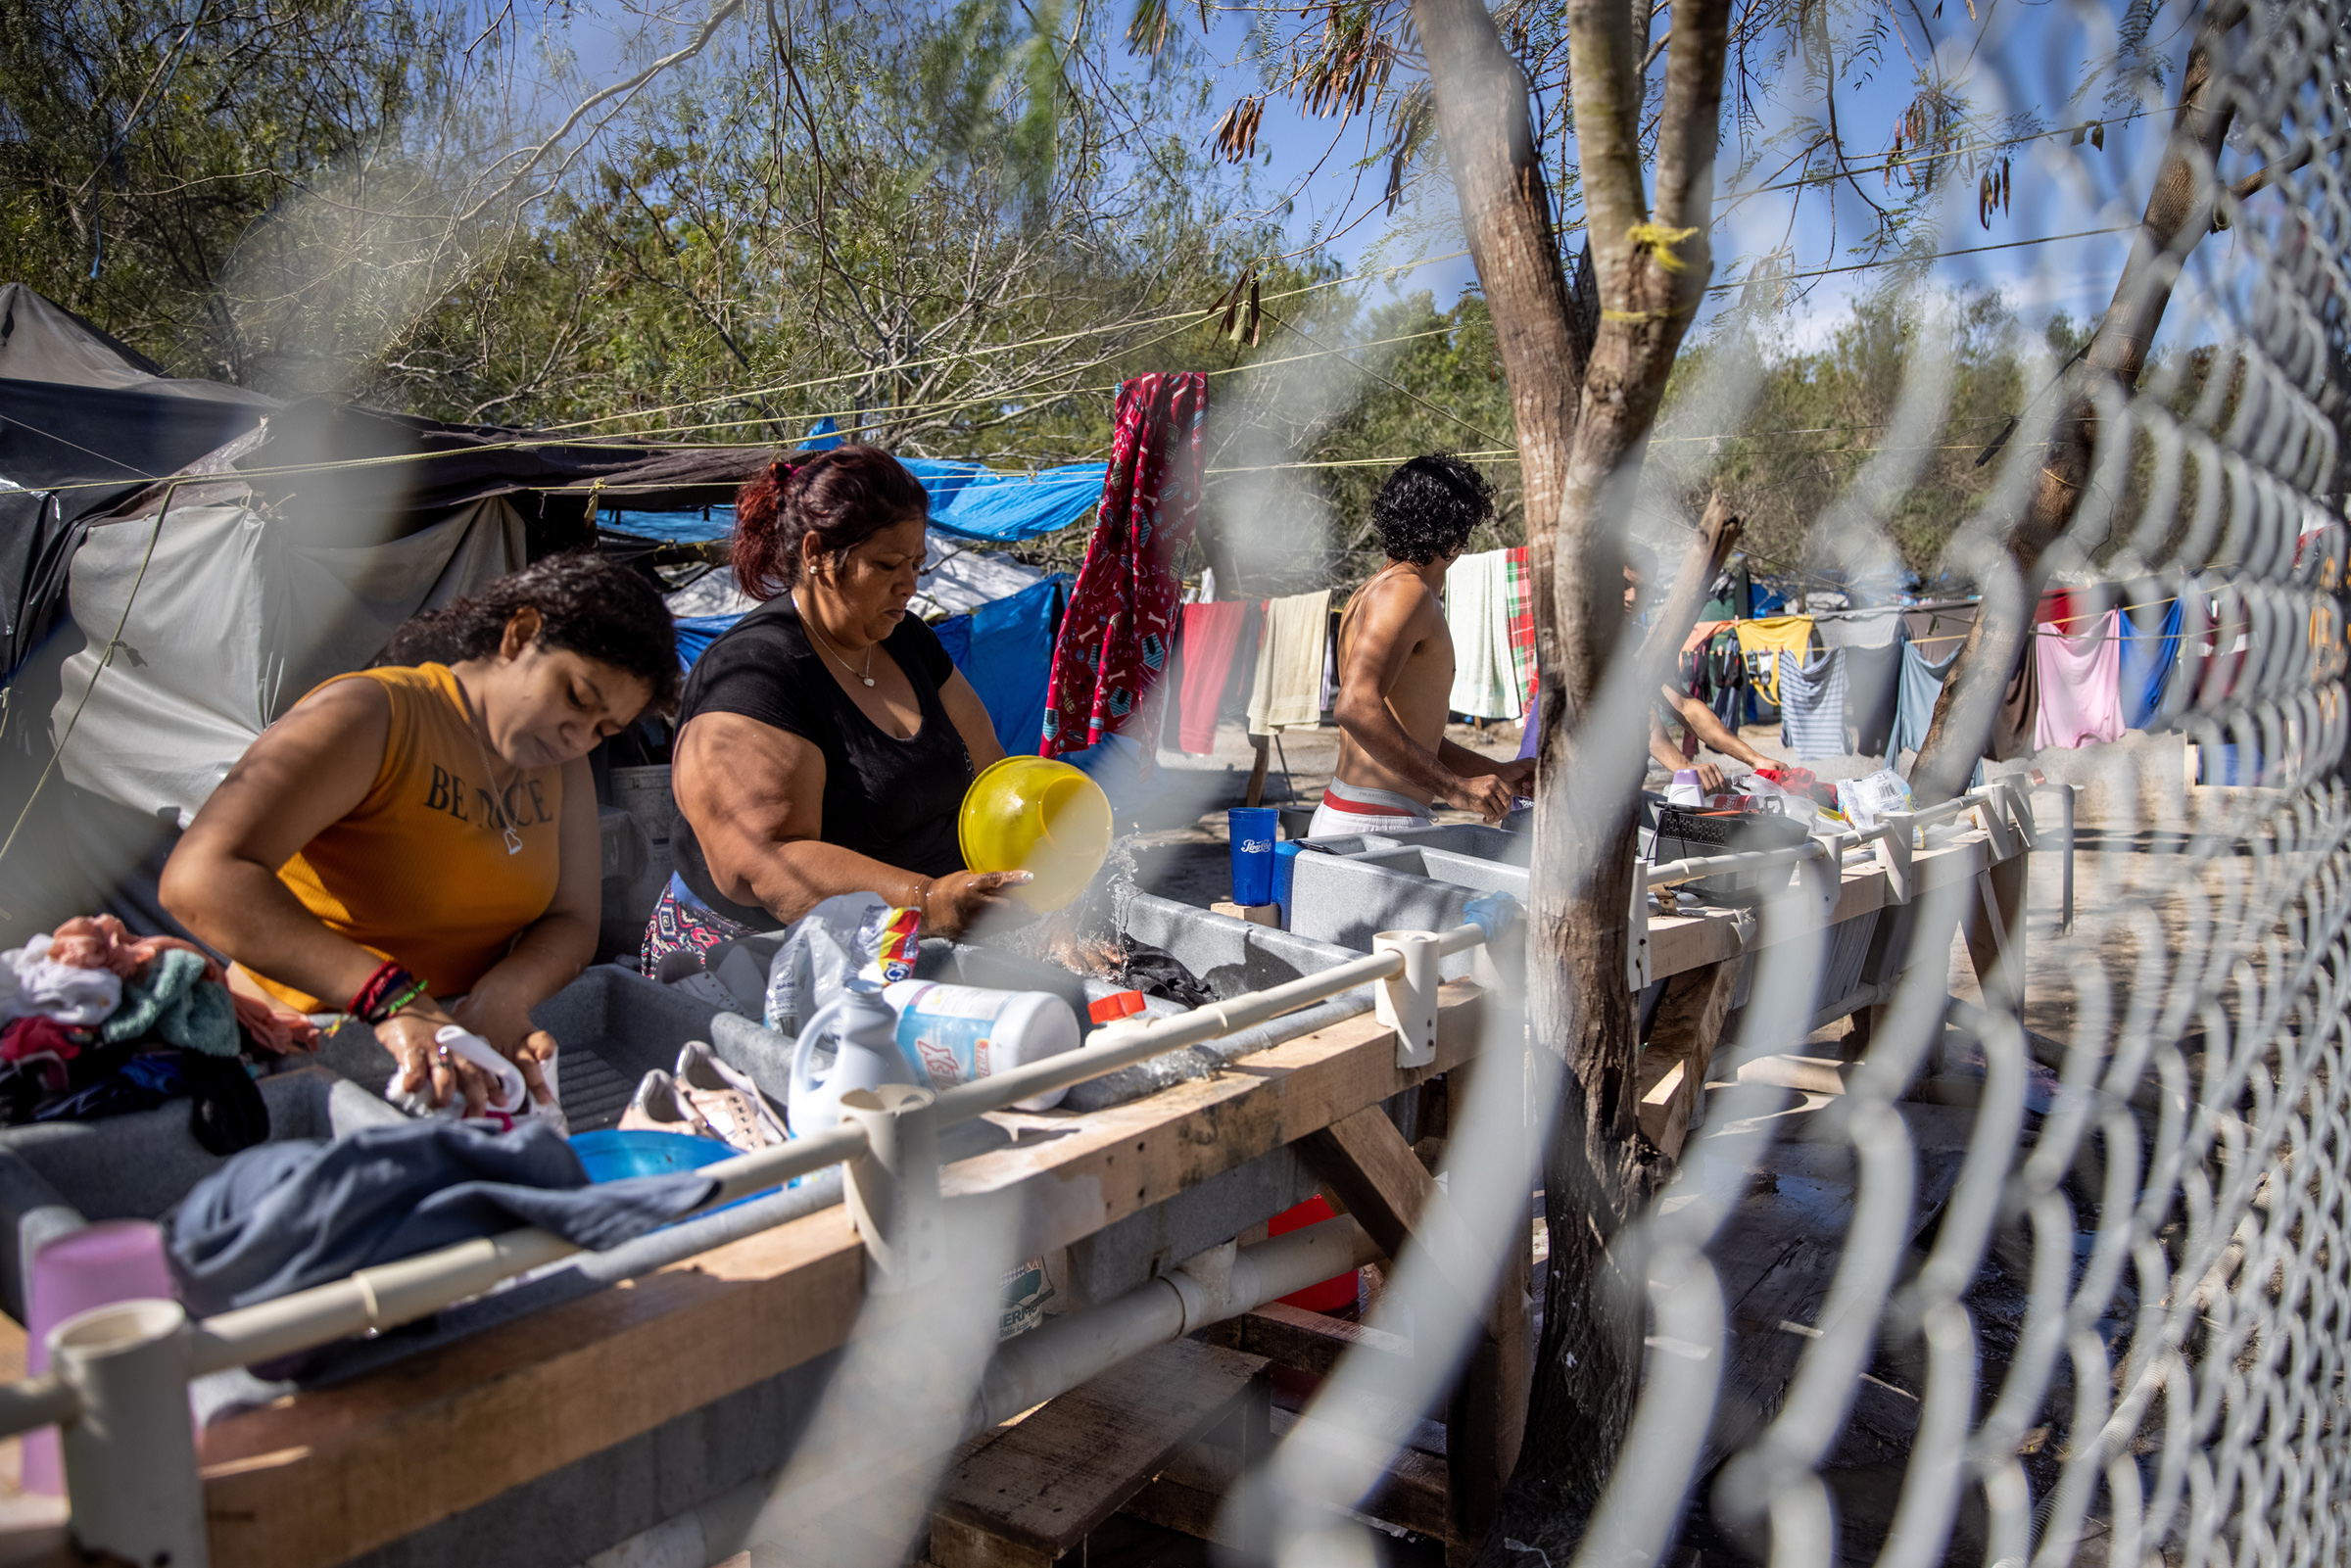 Asylum seekers washing clothing inside a camp in Matamoros, Mexico on Feb. 7, 2021. (John Moore—Getty Images)